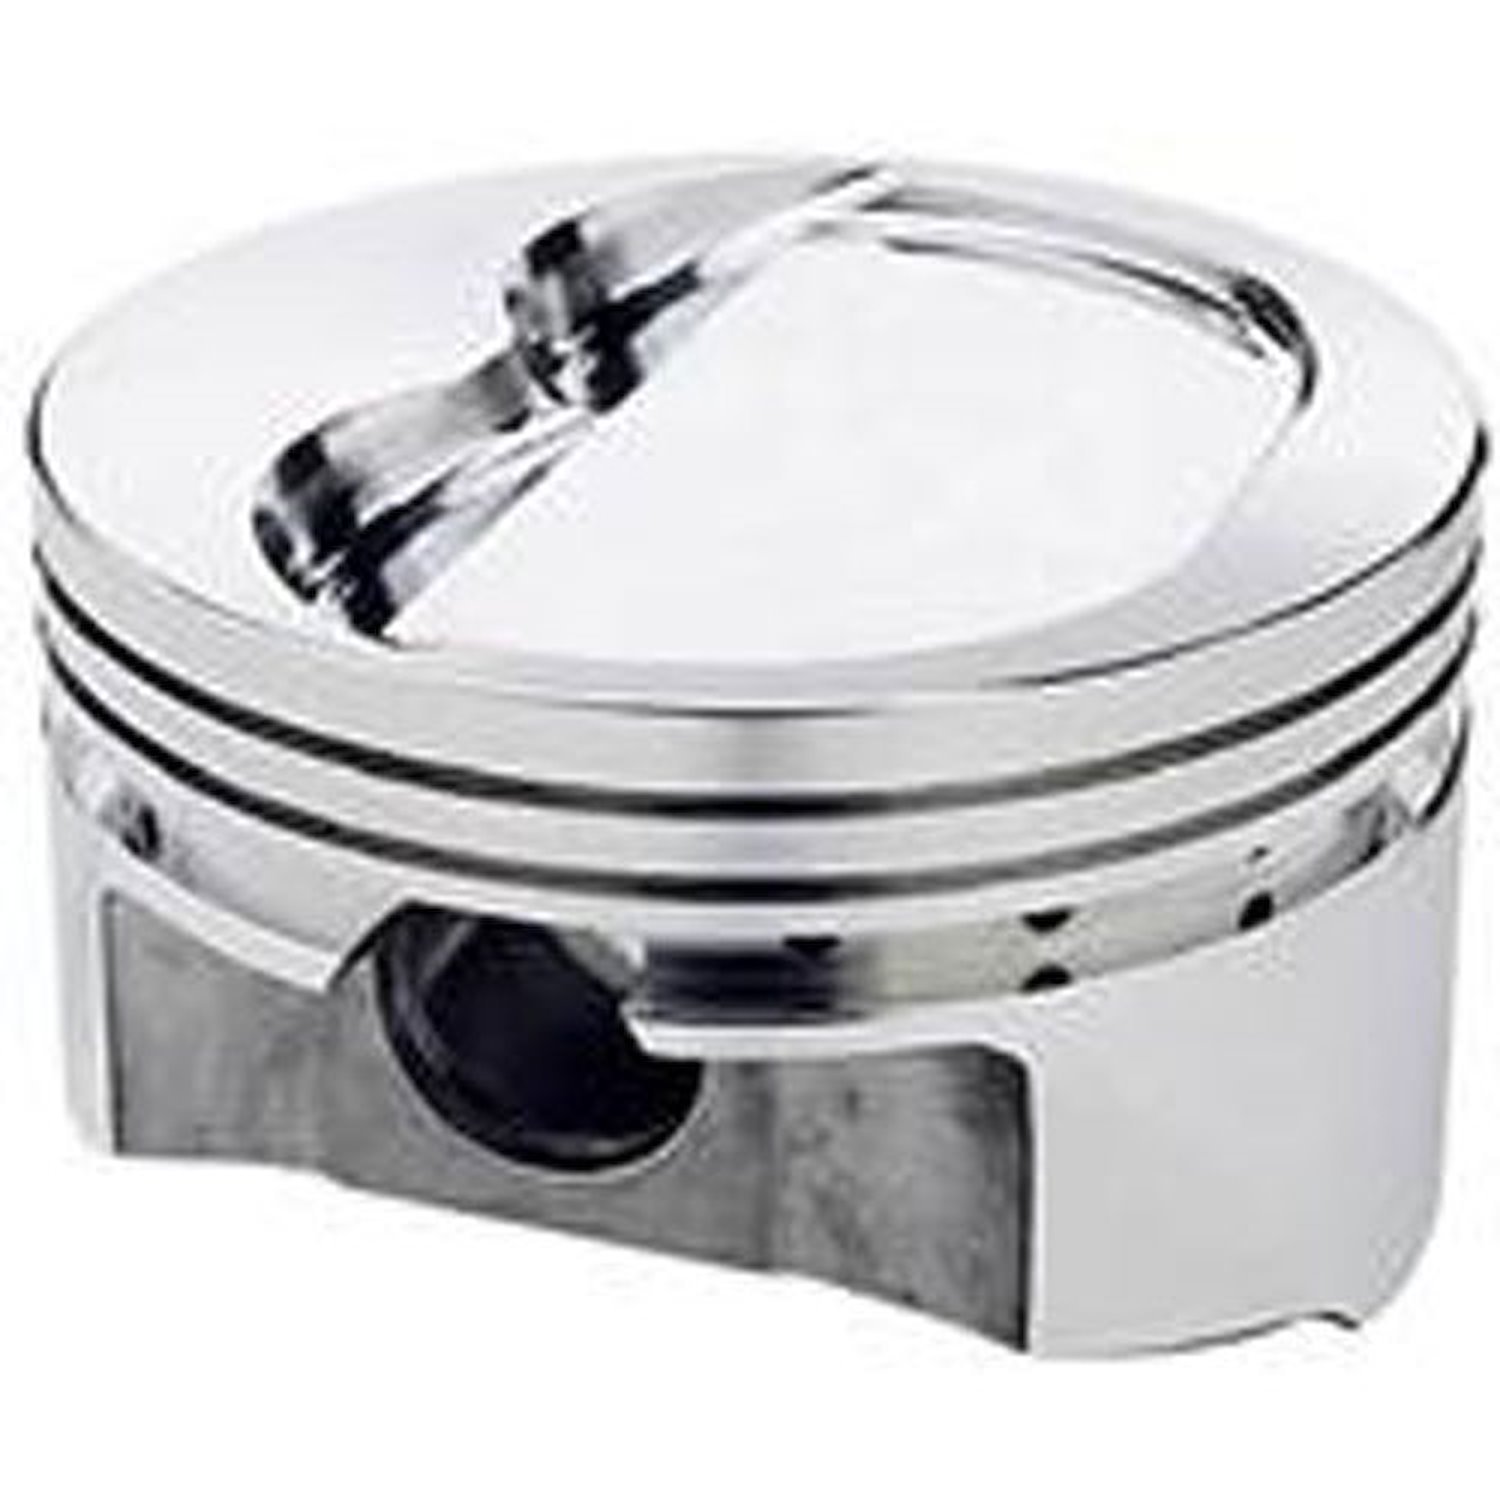 SB-Chevy Inverted Dome Pistons Bore 4.030